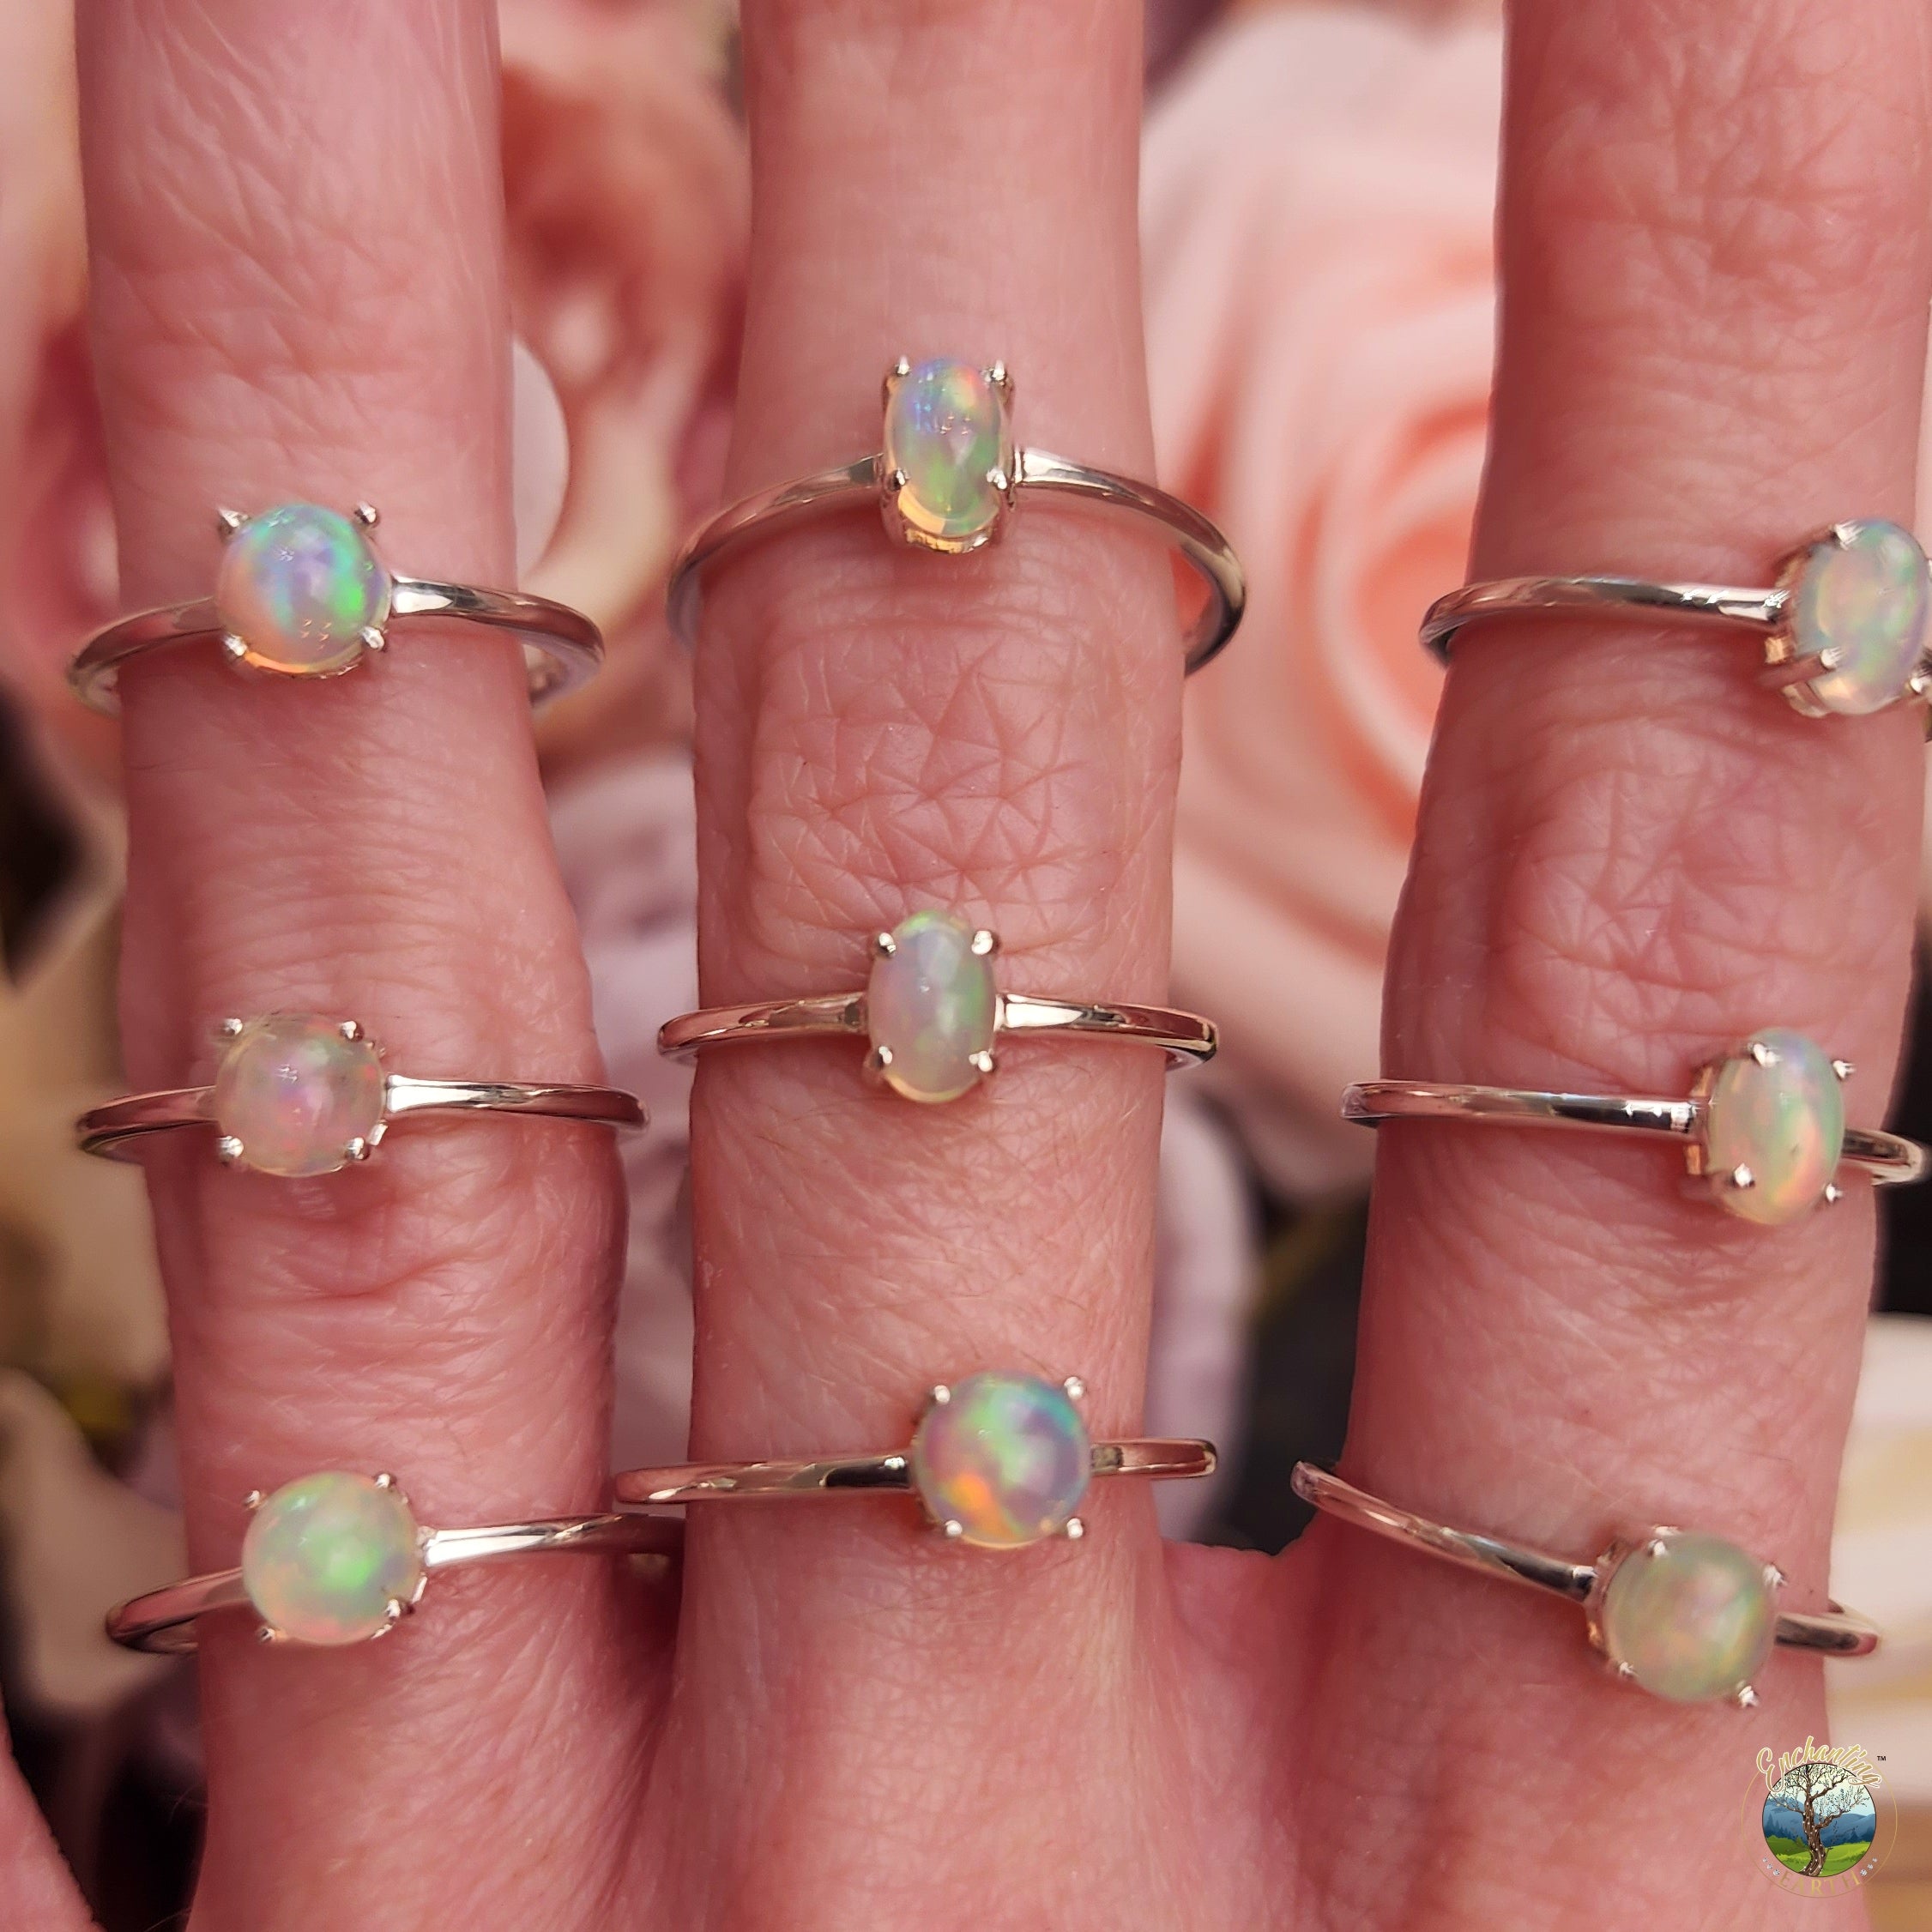 Ethiopian Opal Dainty Ring with Prong .925 Silver for Creativity, Joy and Pursuing your Dreams